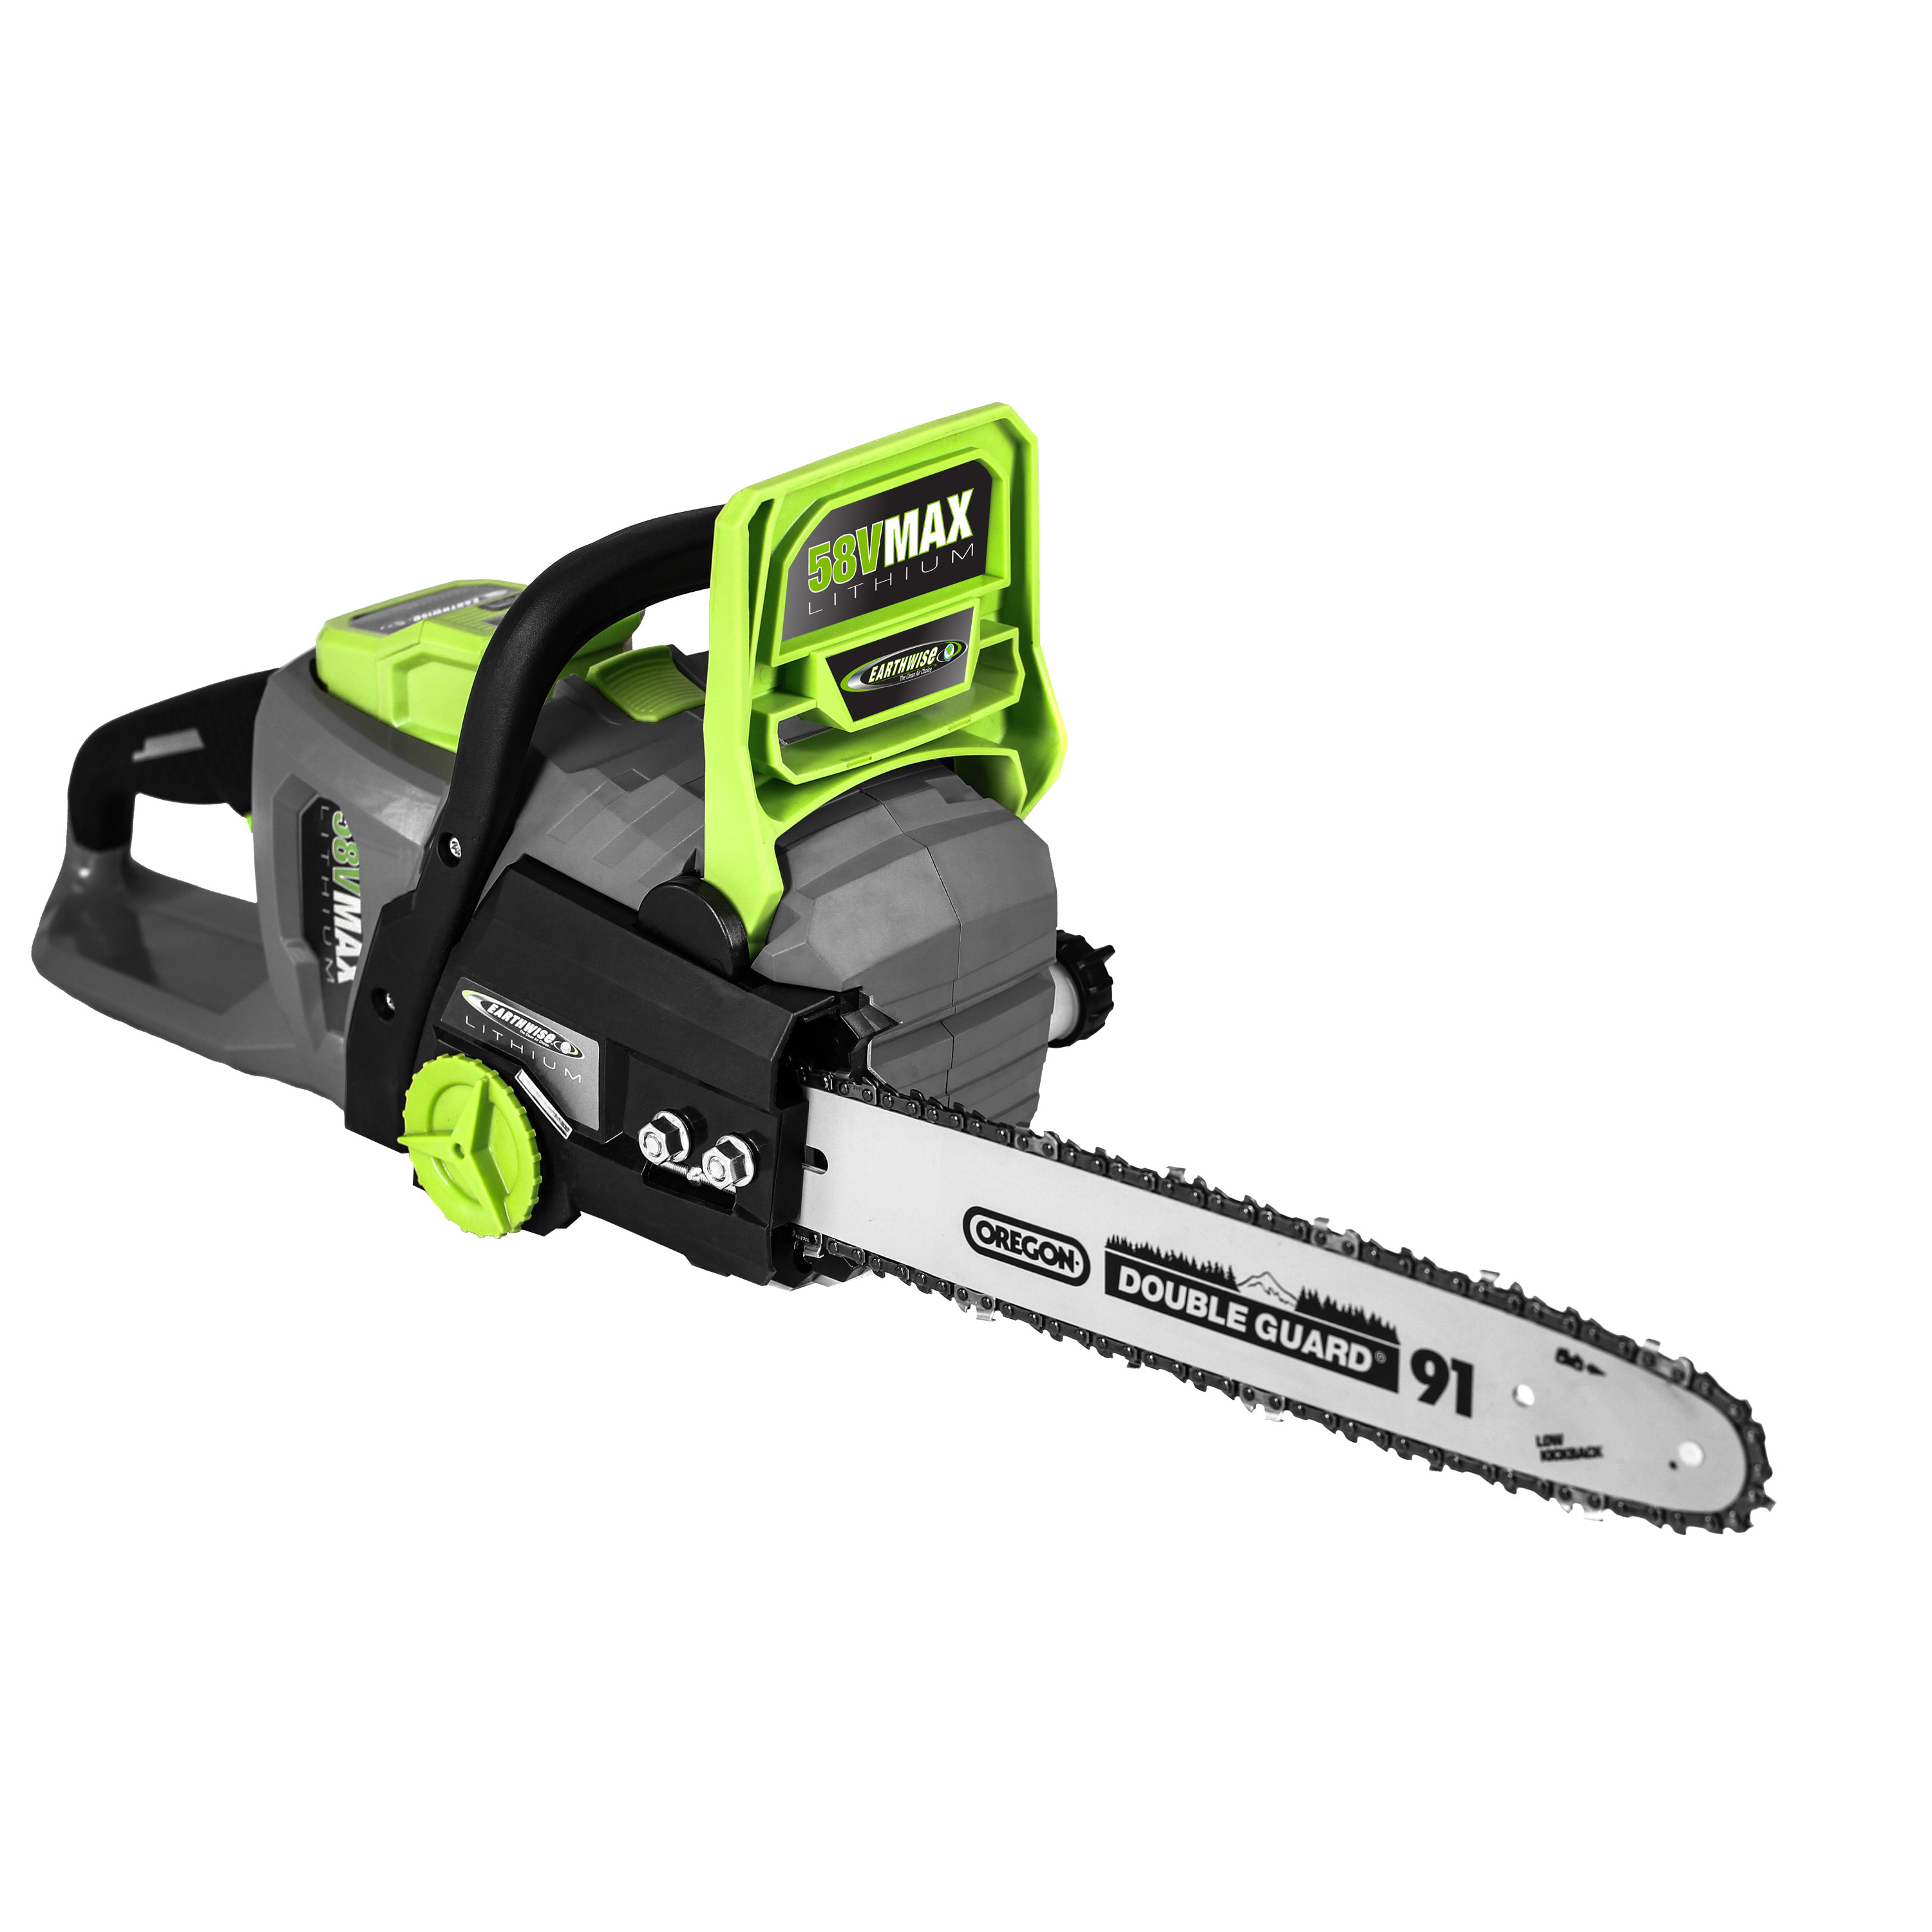 Earthwise LCS35814 14" 58-Volt Cordless Chainsaw, Brushless Motor (2Ah Battery and Charger Included) - image 1 of 5